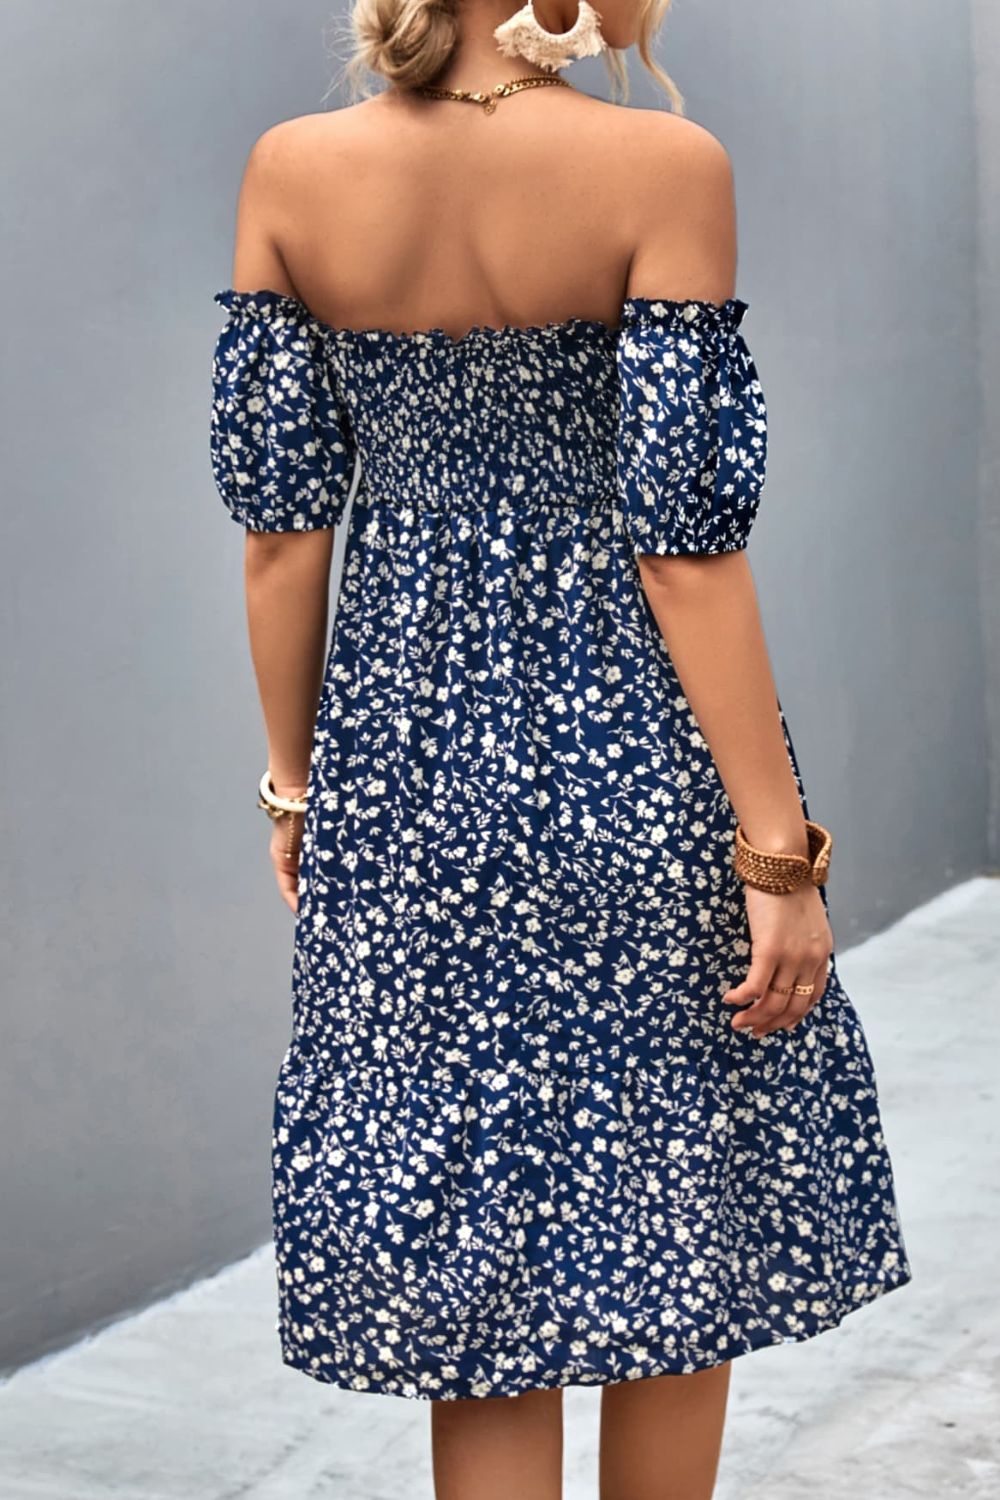 Smocked Off-Shoulder Dress: A stylish dress featuring a smocked bodice and an off-shoulder neckline for a trendy and feminine look.